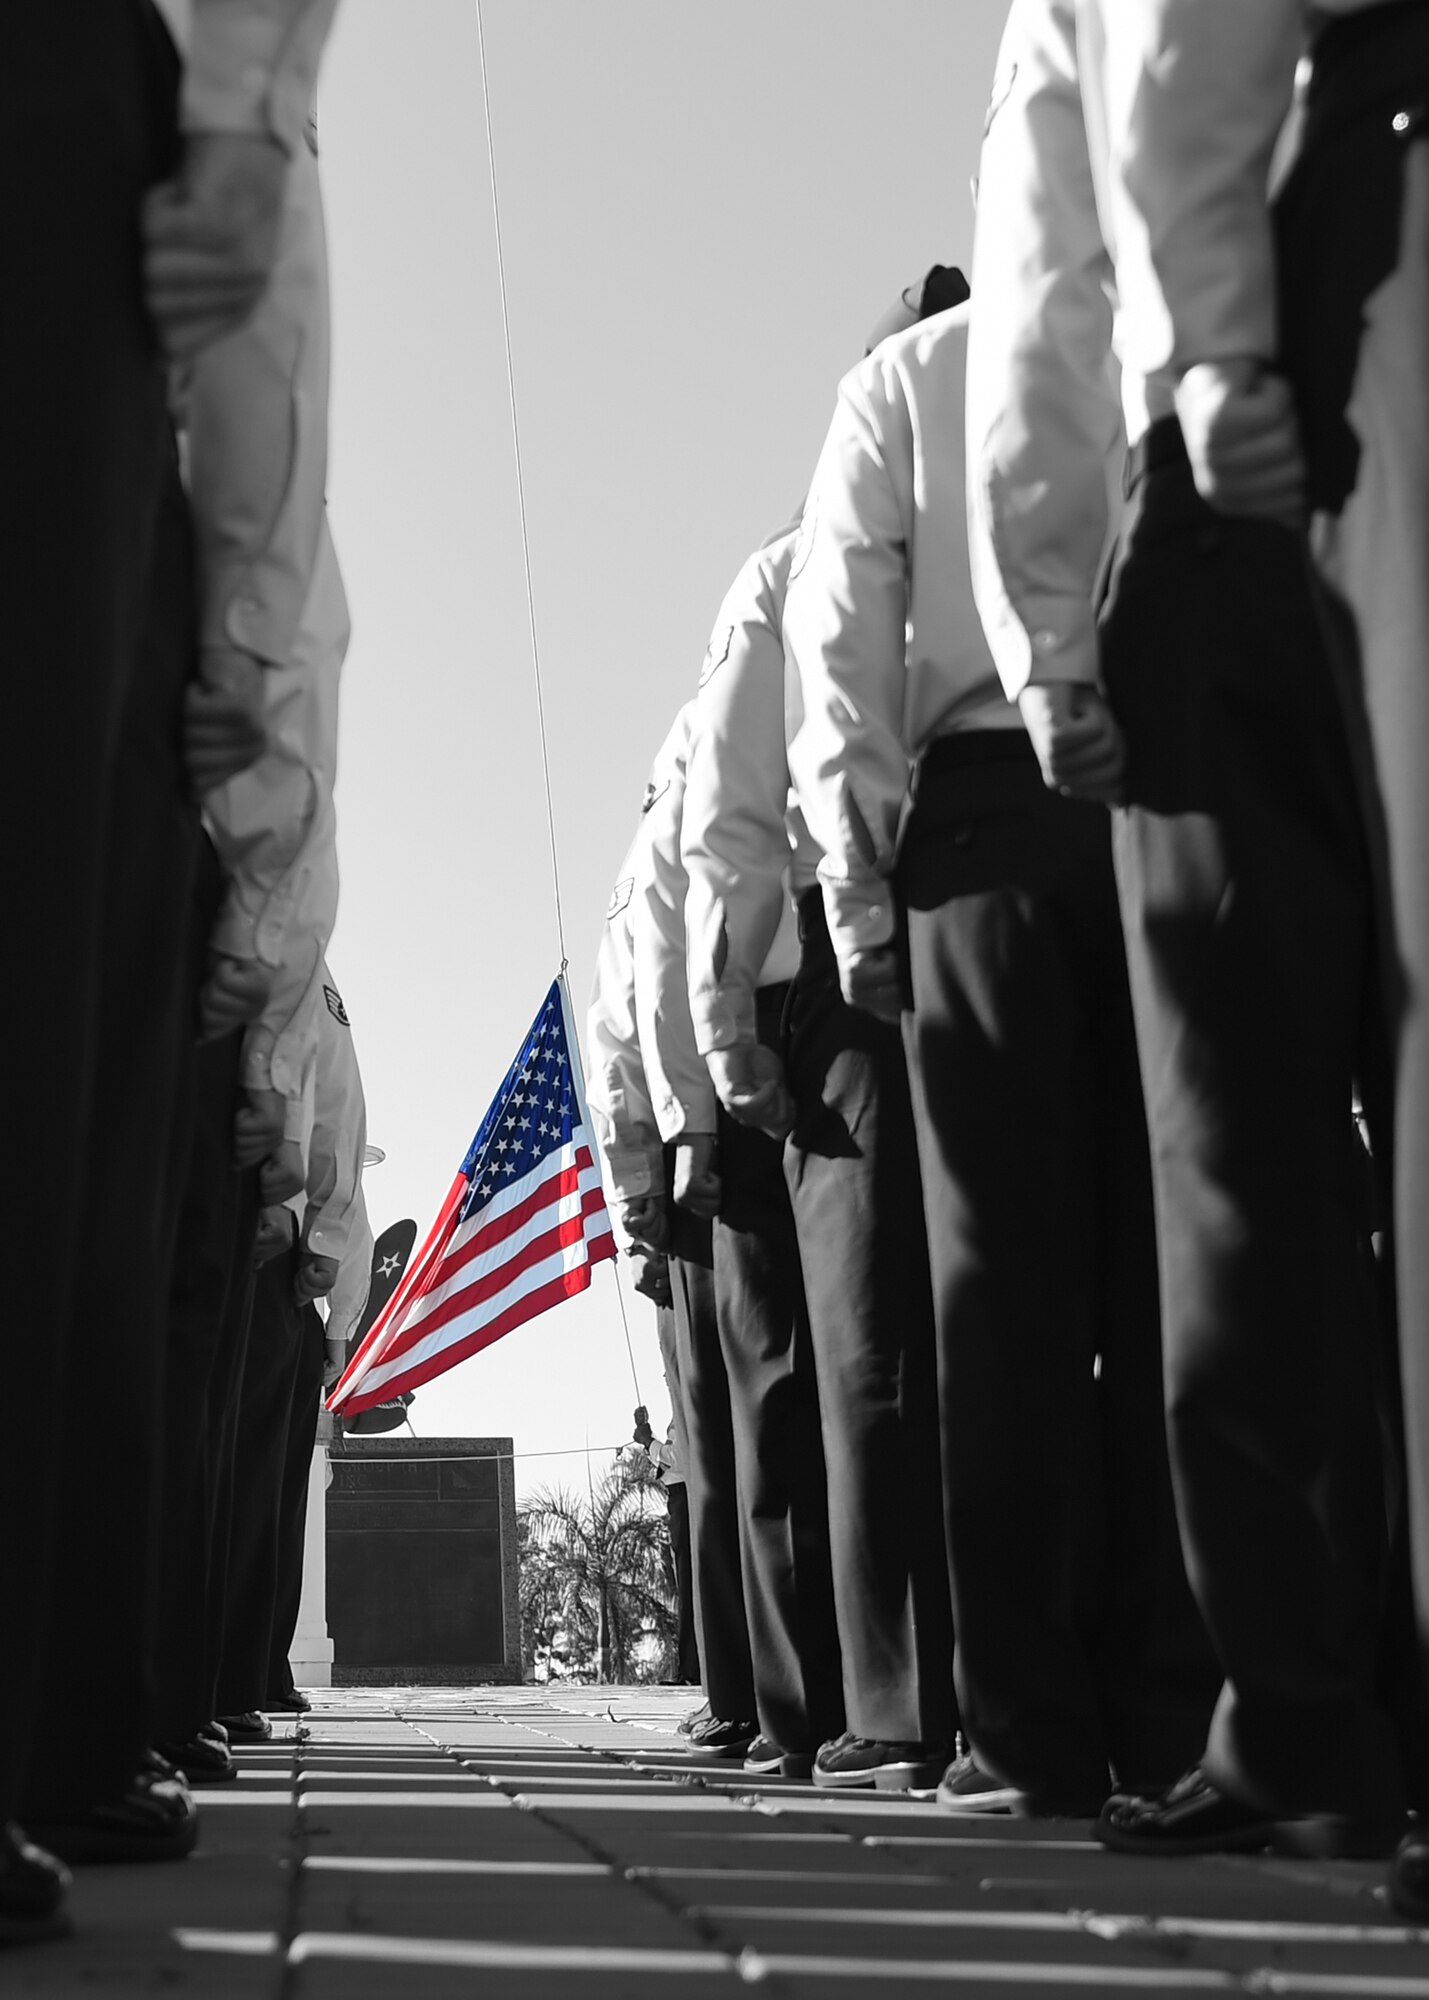 Members of the 747th Communications Squadron stand at attention prior to a Reveille ceremony on Joint Base Pearl Harbor-Hickam, Hawaii, July 2, 2015. The ceremony was held to honor the upcoming Fourth of July holiday. This year, the United States of America celebrates 239 years of independence.  (U.S. Air Force illustration by Tech. Sgt. Aaron Oelrich/Released) 